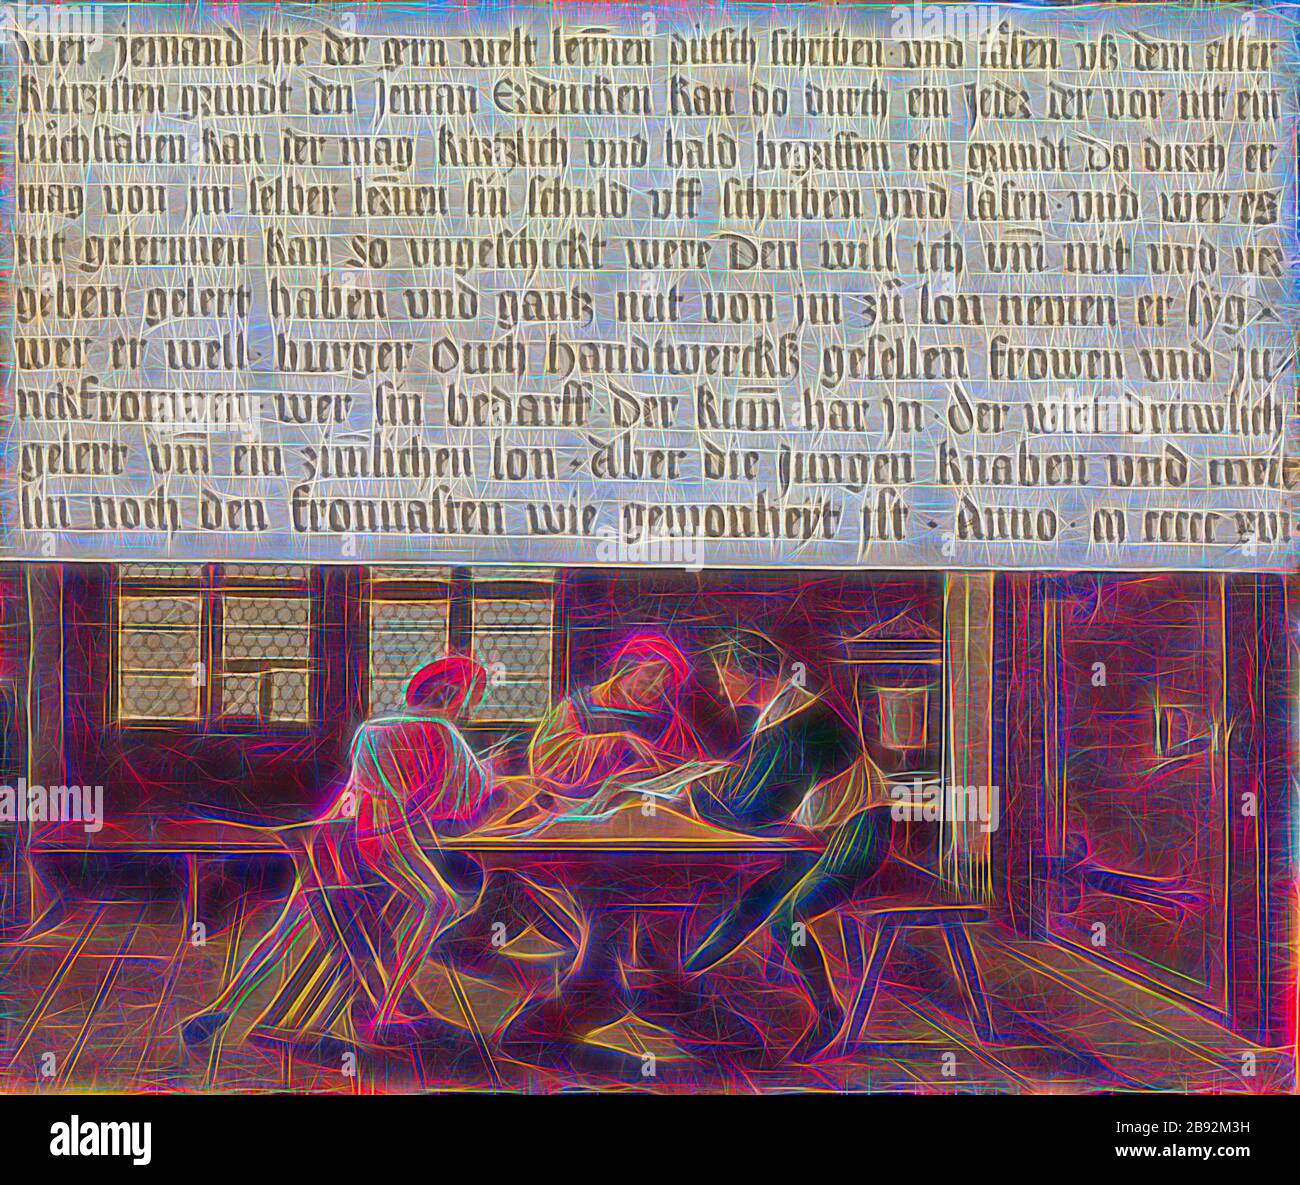 Sign of a schoolmaster (adult side), 1516, mixed technique on spruce, 55.3 x 65.5 cm, Not marked, but dated in the text box: who someone likes to learn the world scholarly [...] and read the all, kurzisten grundt the jeman, Erdencken can do so by anyone who can not nit a, buochstaben the may like and soon understands a reason do through him, her in the self-learning [n] sin blame uff rub and read • and who can, n learn kan so awkward, I would have lured him to death and to give and give, and to give of all in the world to him, he, she, well, burger, ouch, hand-to-hand, and fugen, and fawns, m] Stock Photo